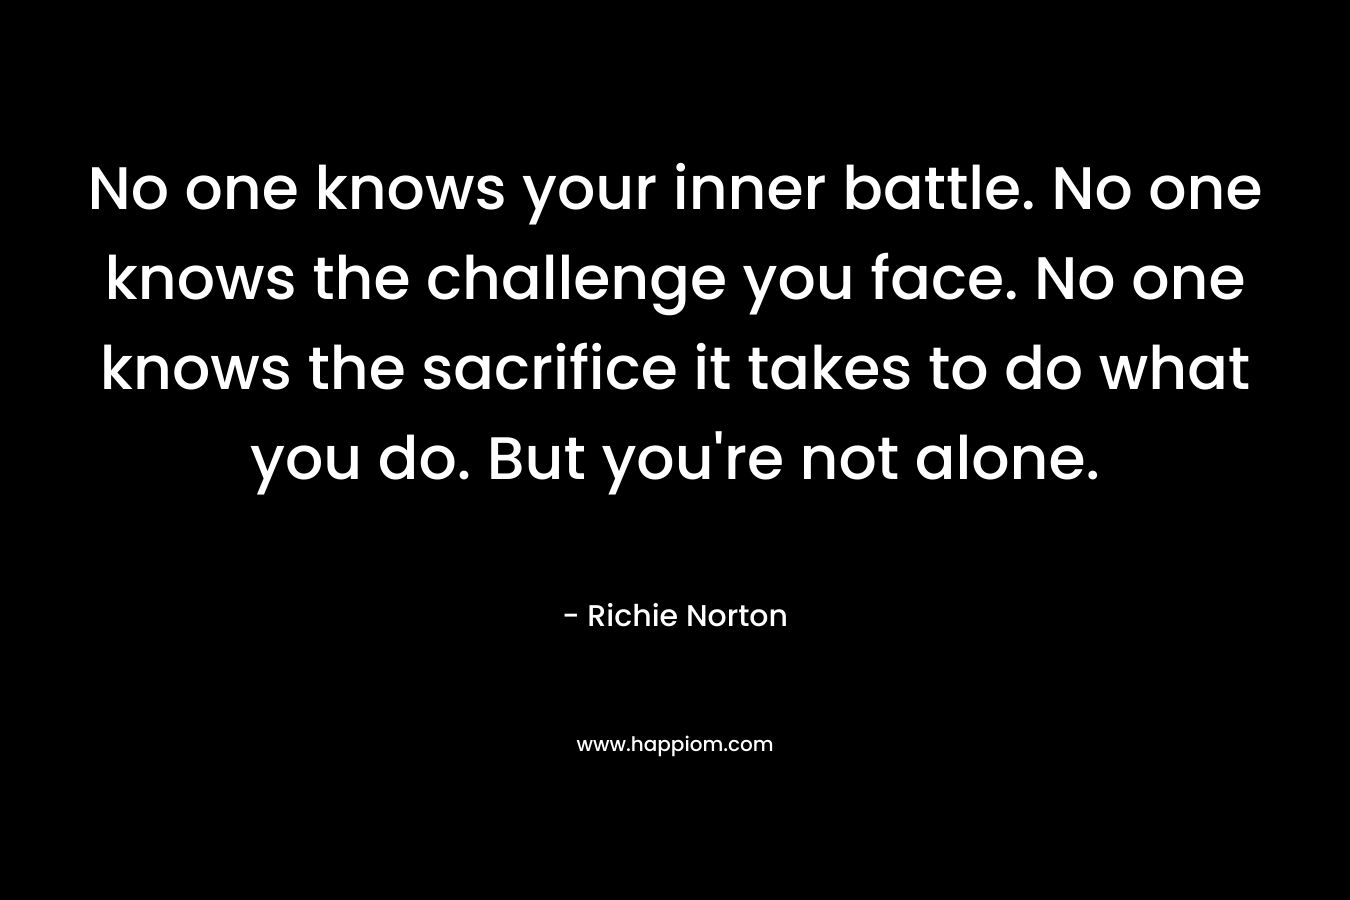 No one knows your inner battle. No one knows the challenge you face. No one knows the sacrifice it takes to do what you do. But you're not alone.